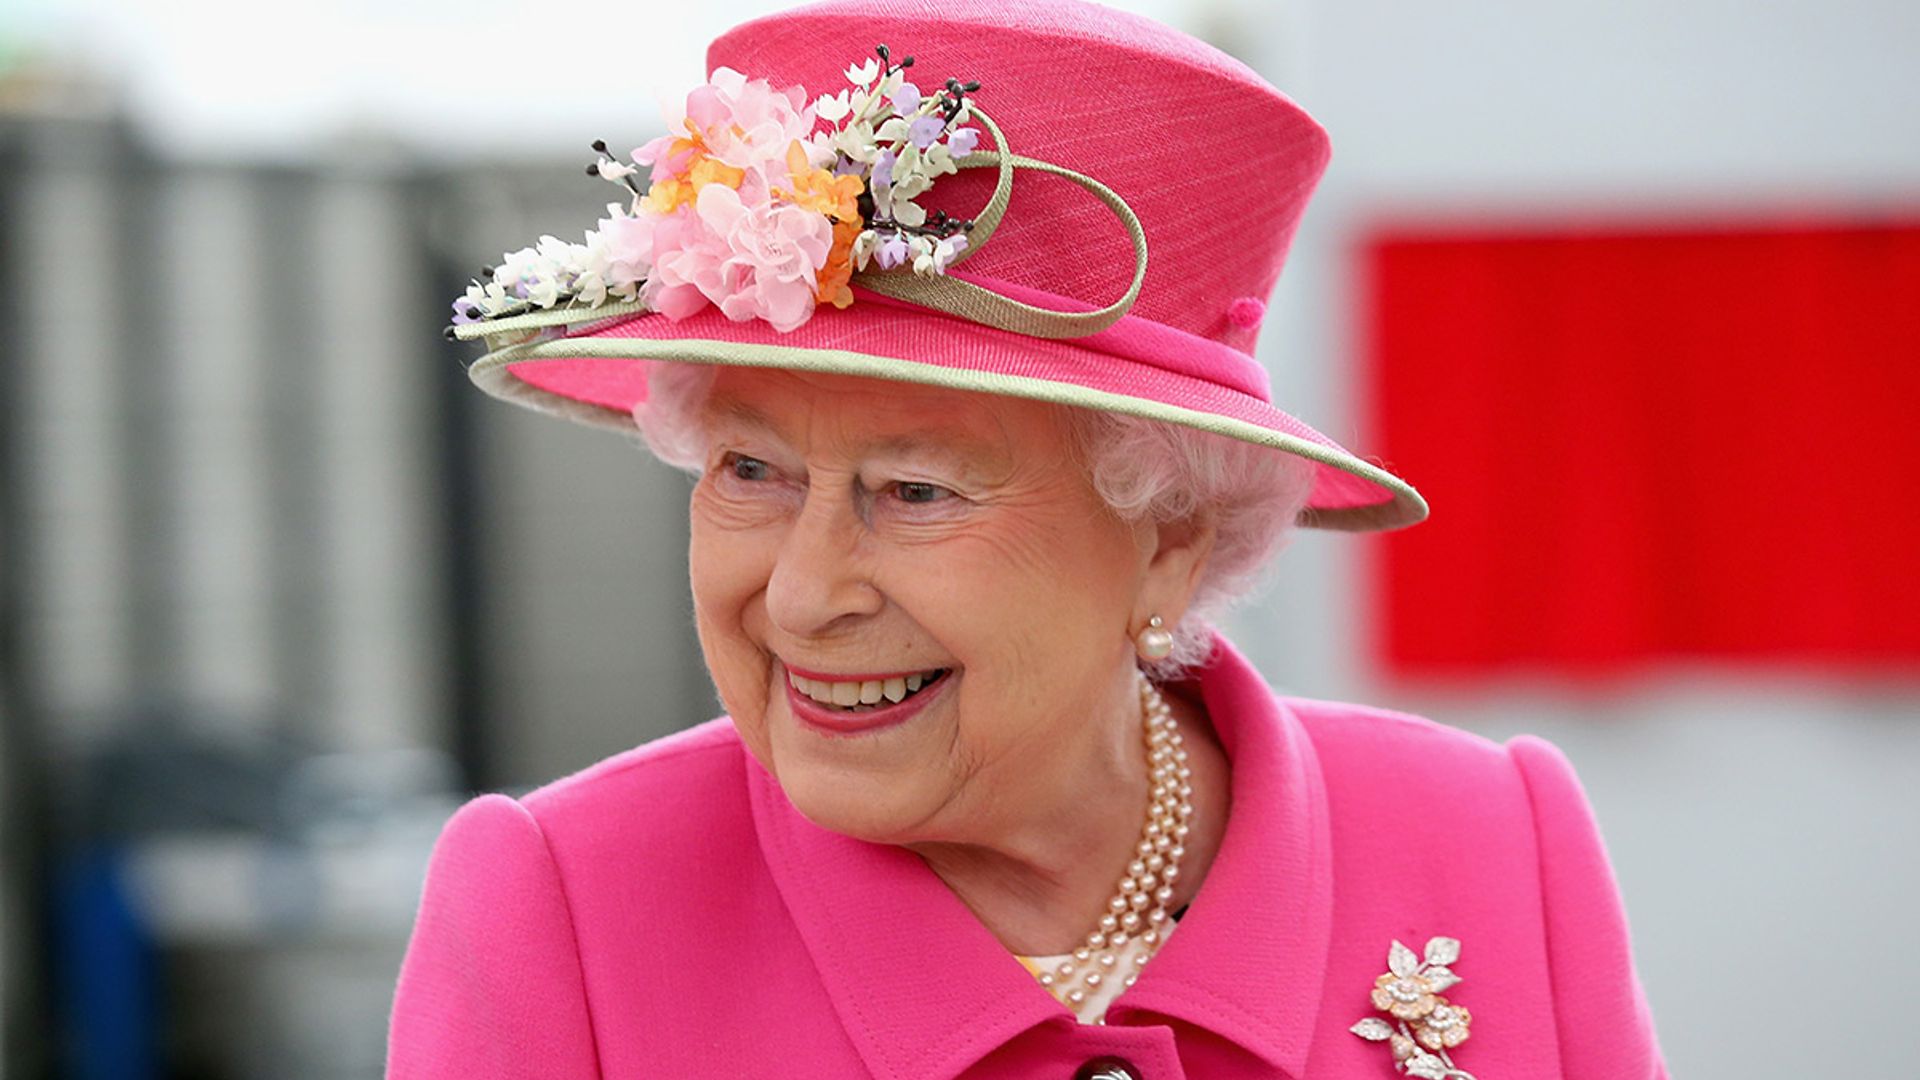 The Queen's personal birthday phone call revealed